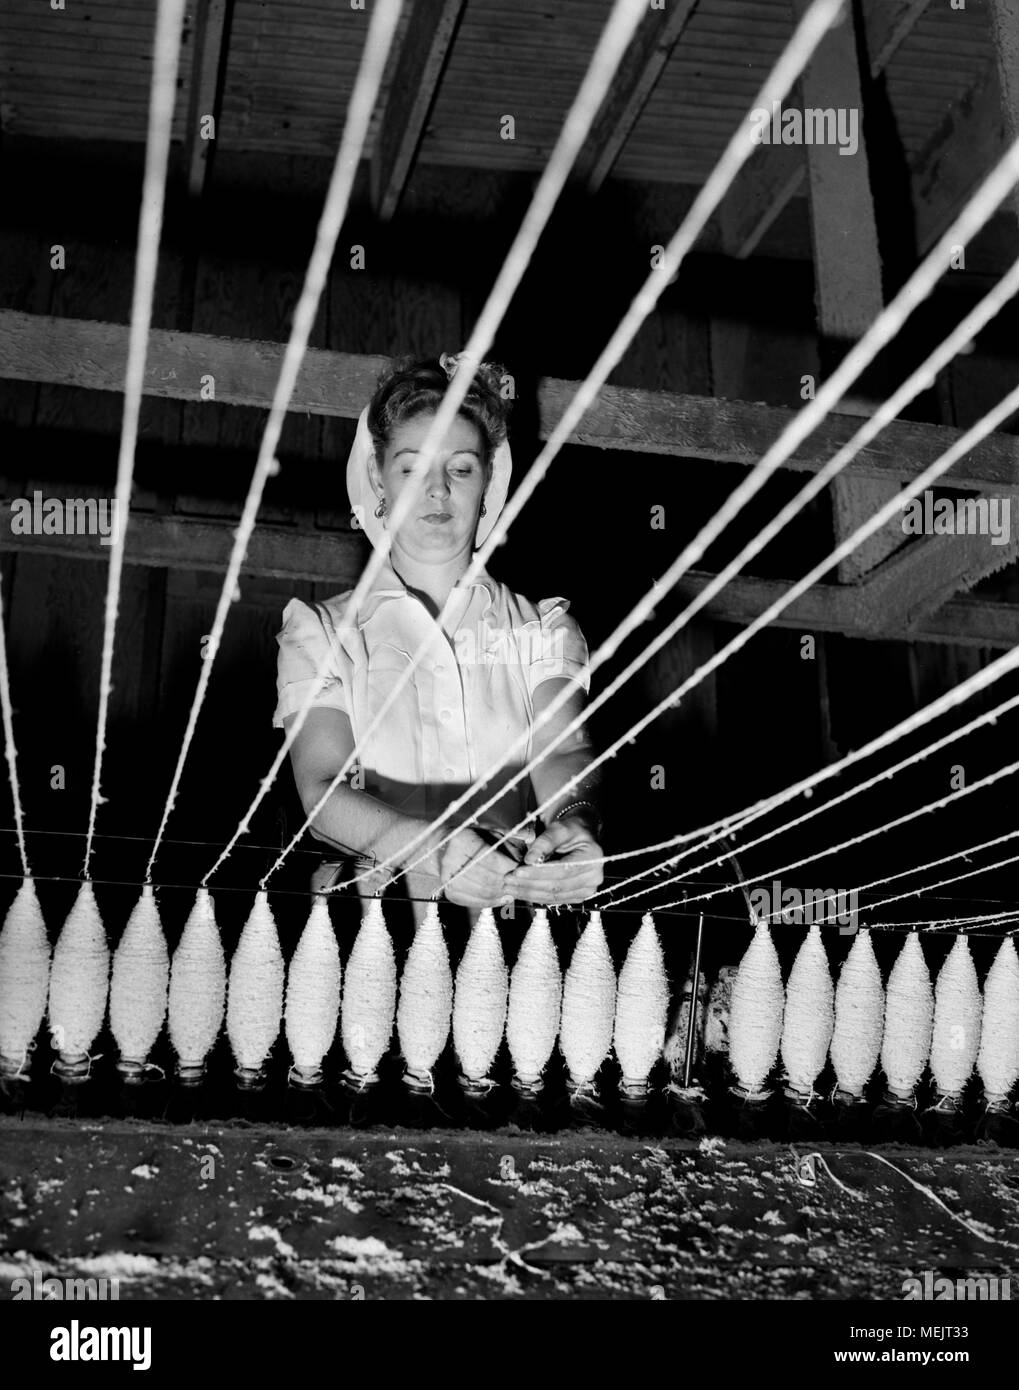 A worker watches an early industrial plastic manufacturing process in a California factory, ca. 1946. Stock Photo